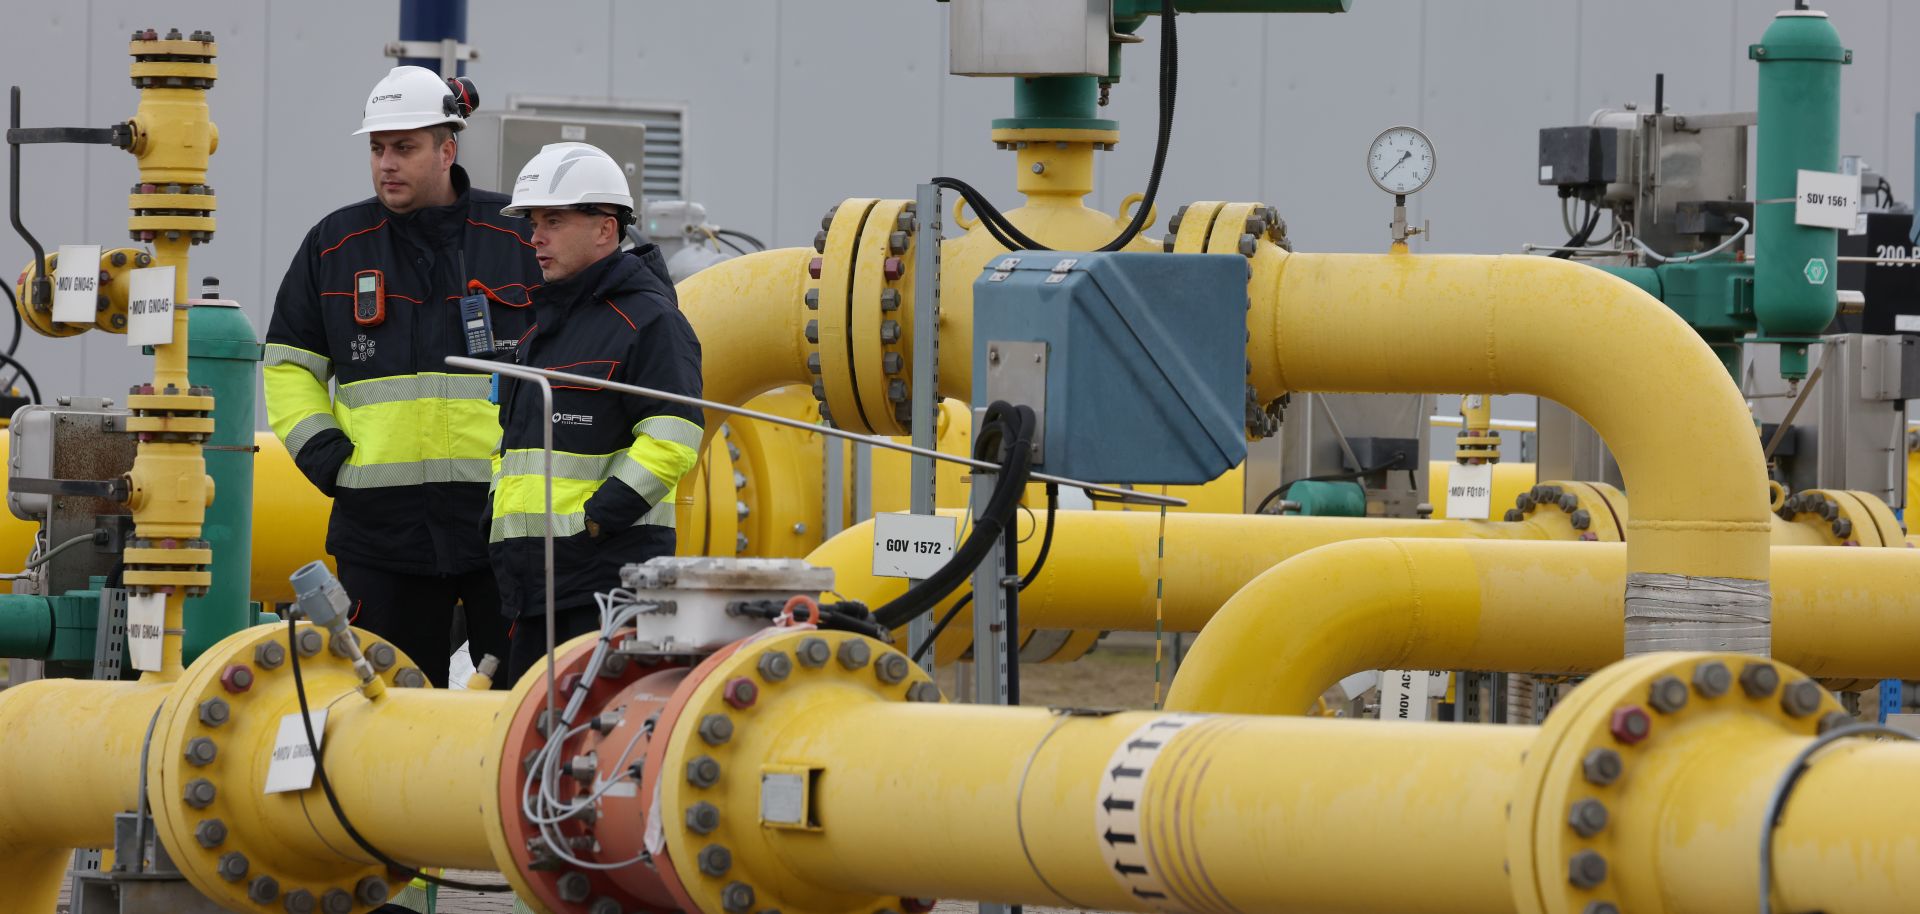 Workers at Polish natural gas company Gaz-System stand among pipes at a compressor station of the new Baltic Pipe natural gas pipeline on the day of its official opening on Sept. 27, 2022, near Goleniow, Poland.